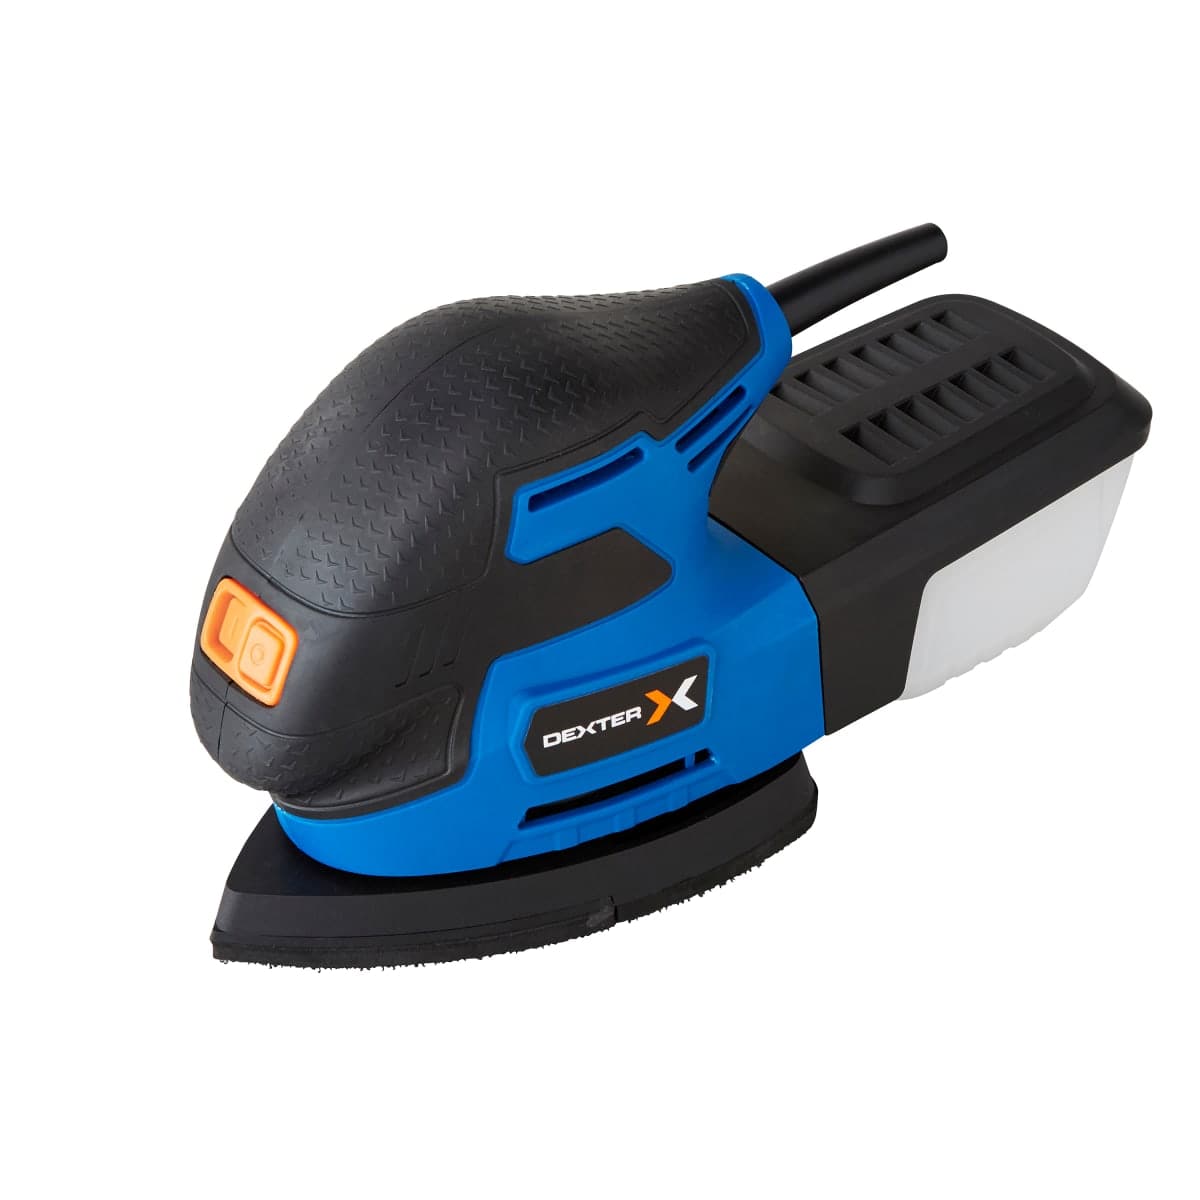 MOUSE DEXTER 220W PLATE 93x93x93MM WITH VACUUM SYSTEM - best price from Maltashopper.com BR400730119